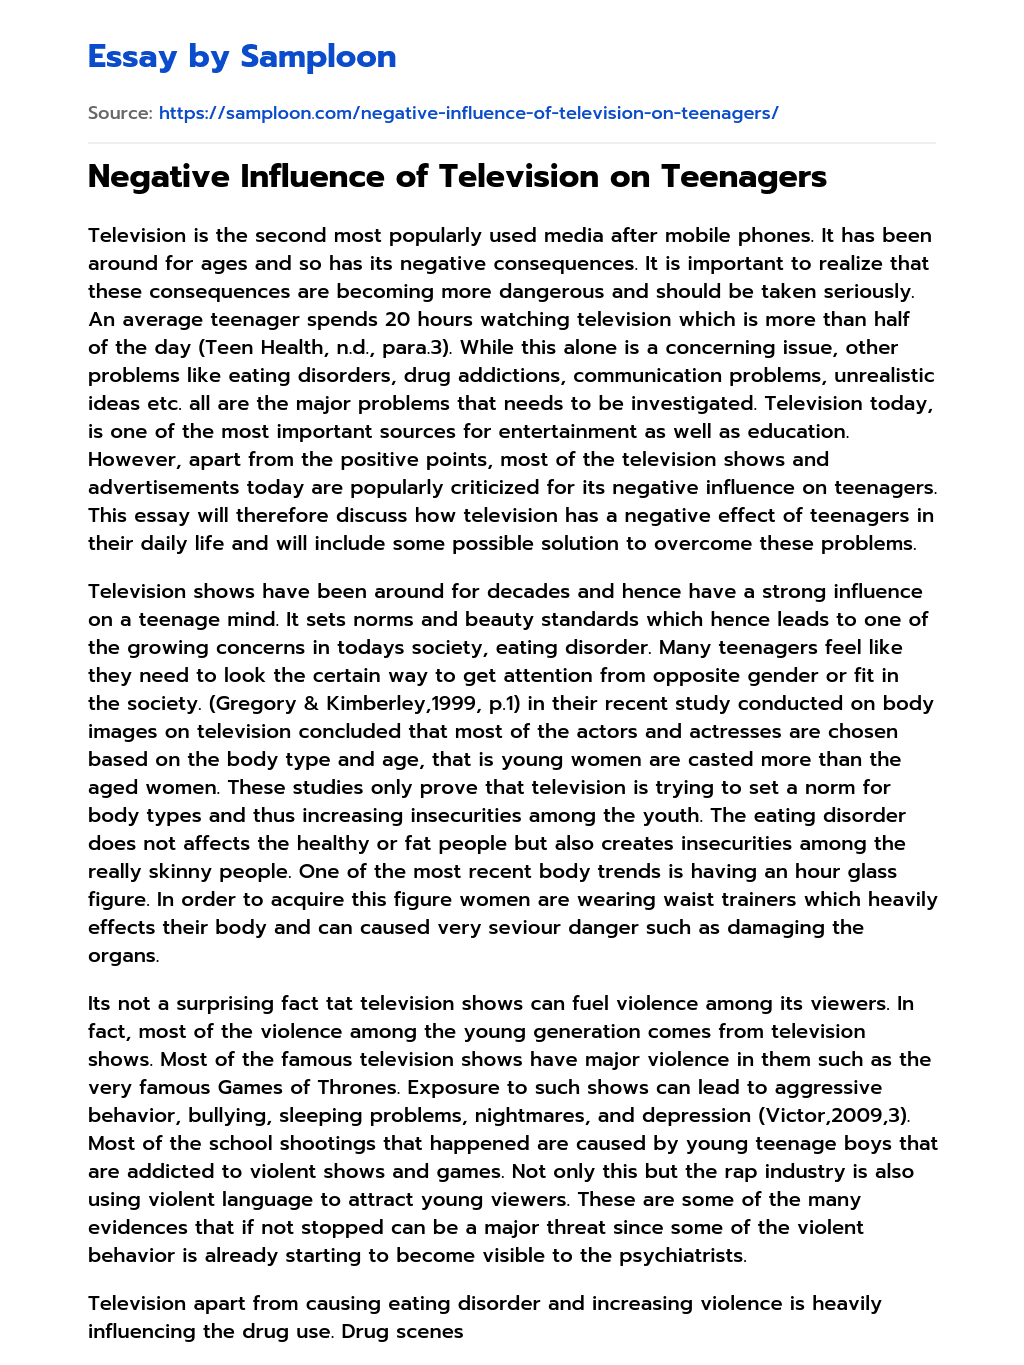 Negative Influence of Television on Teenagers essay